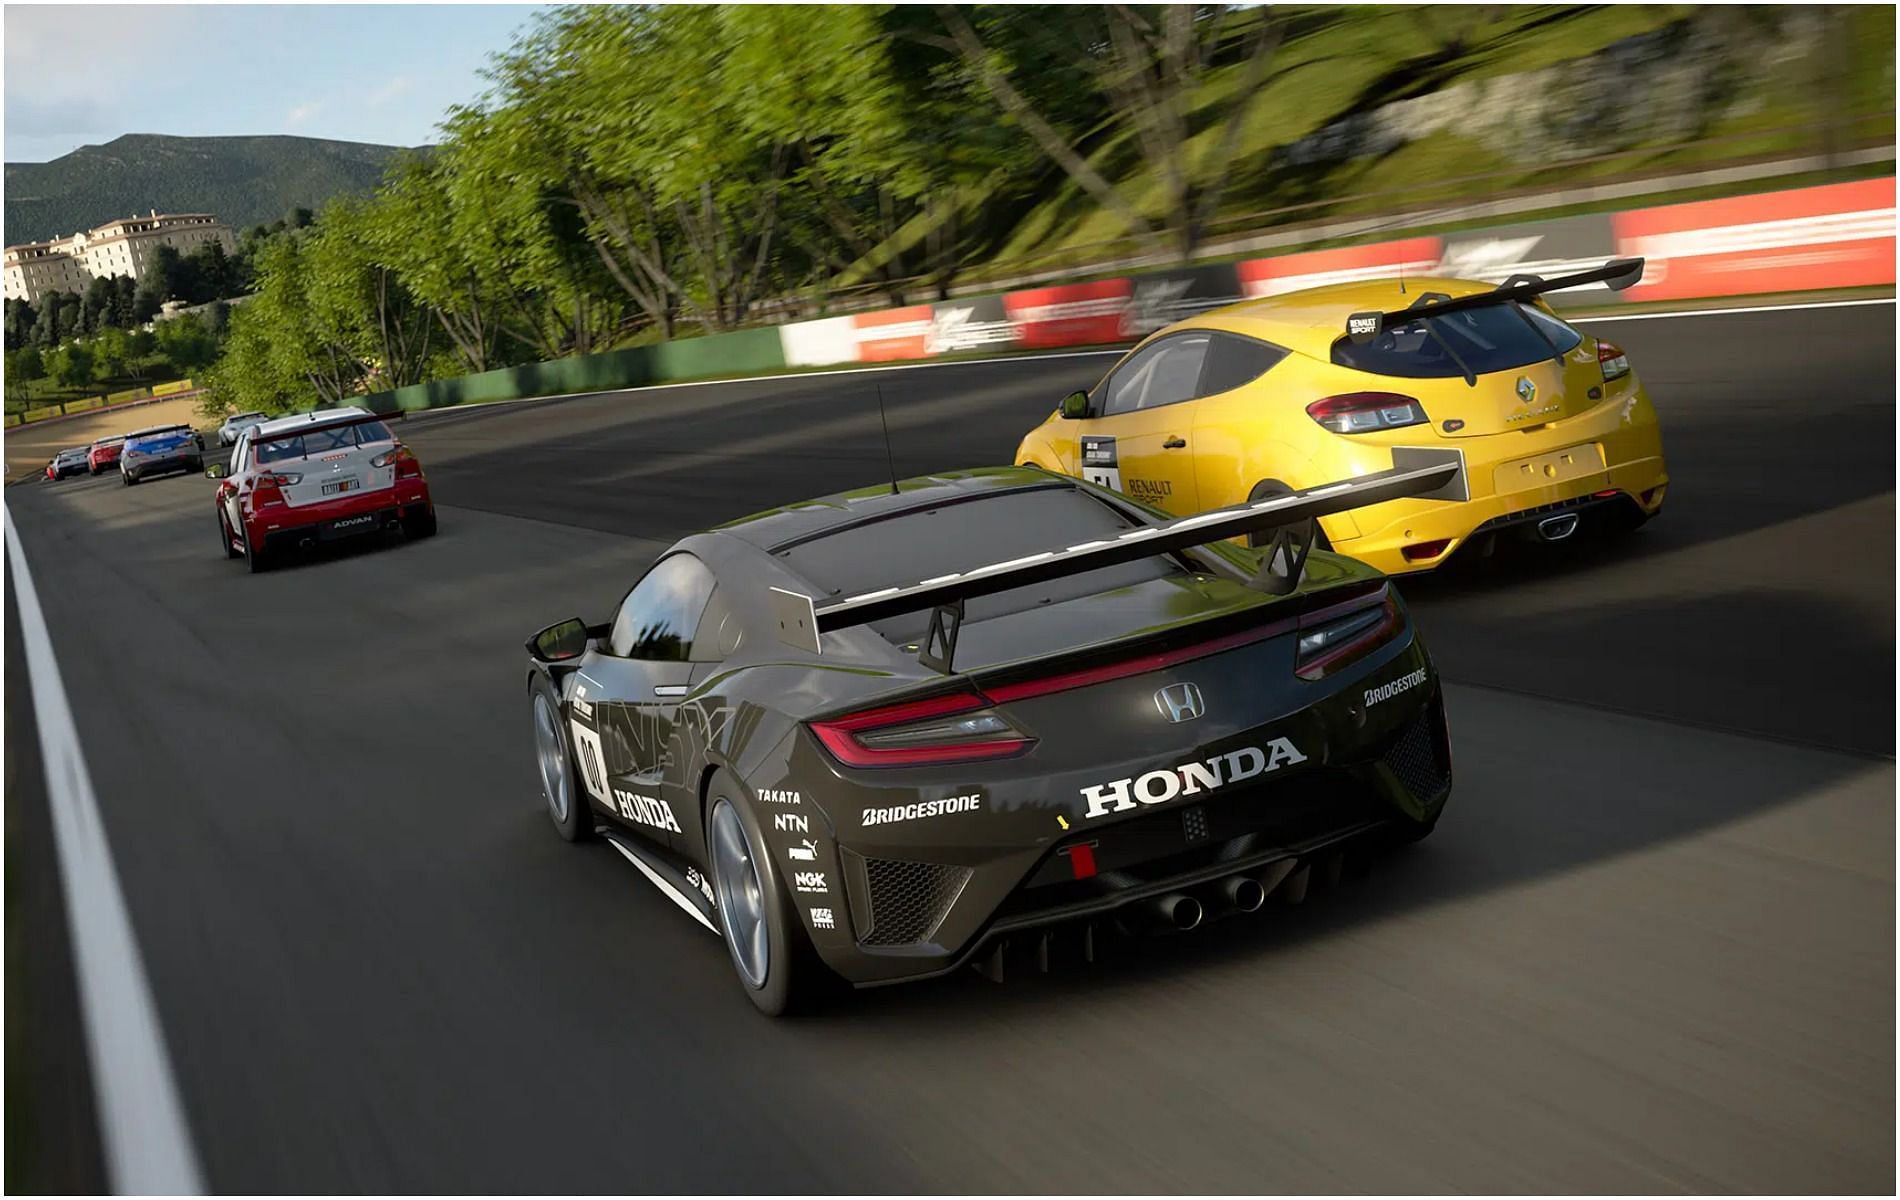 Gran Turismo 7 will feature ray tracing on PS5